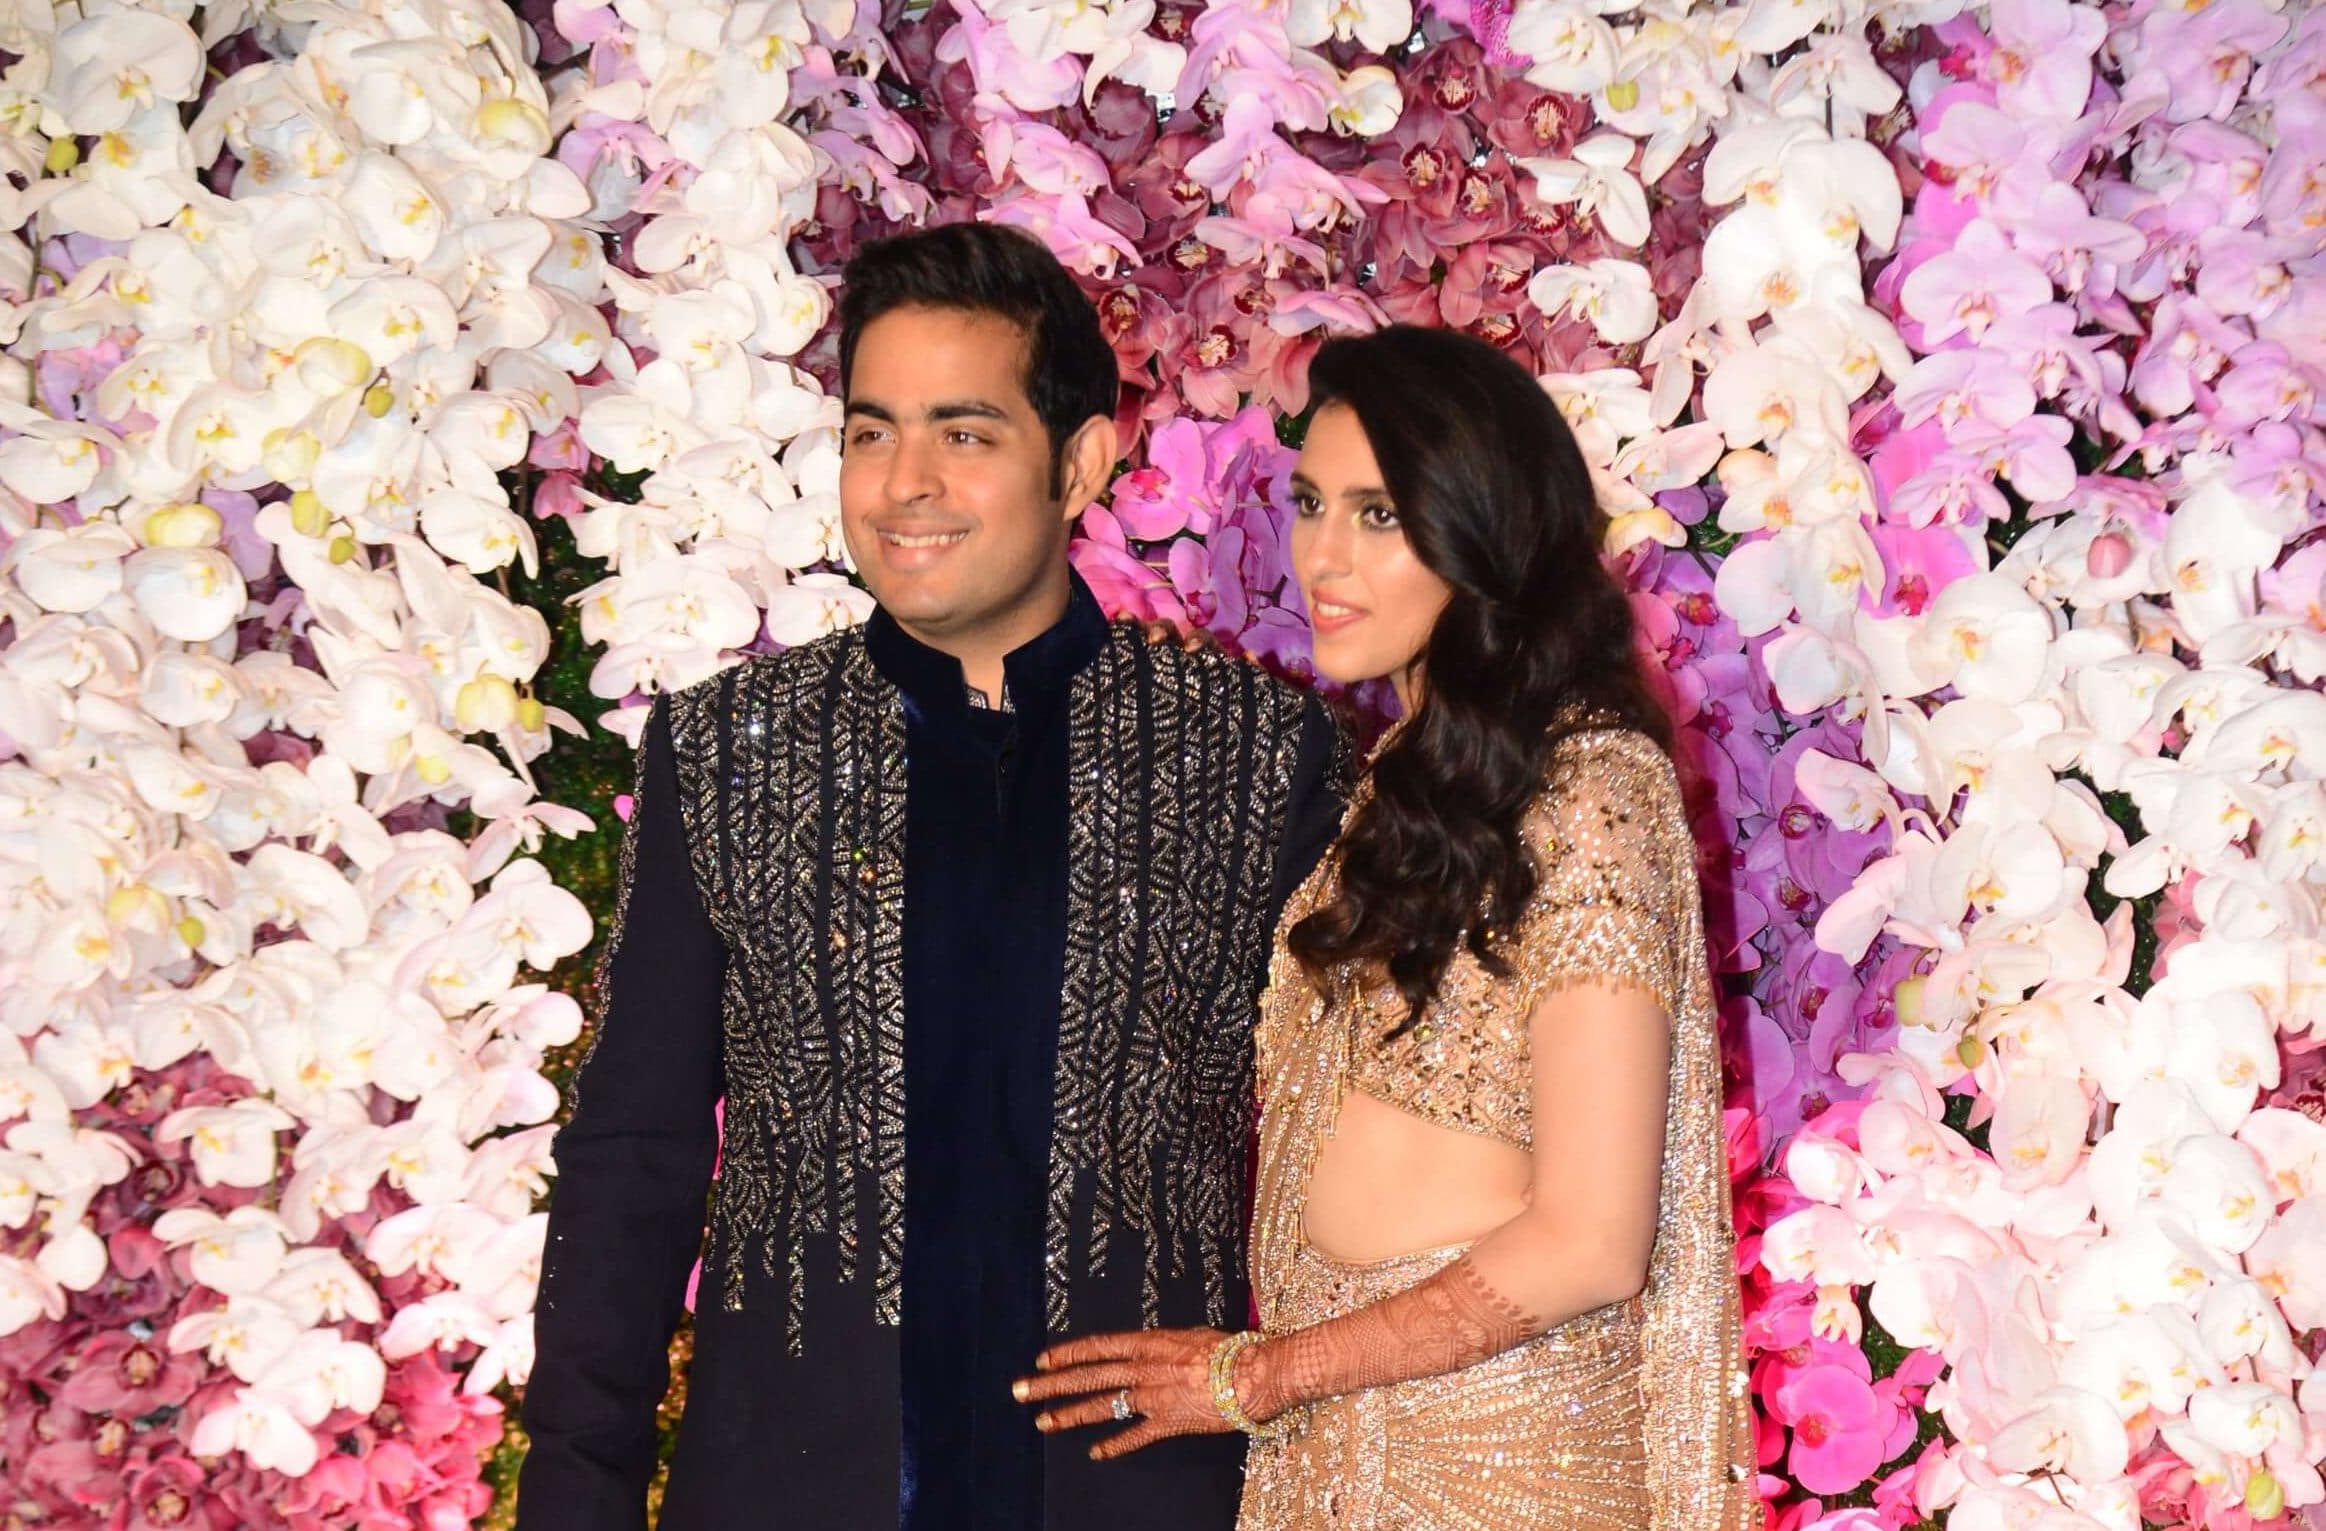 Men at work: The best-dressed gents we spotted at the Ambani wedding